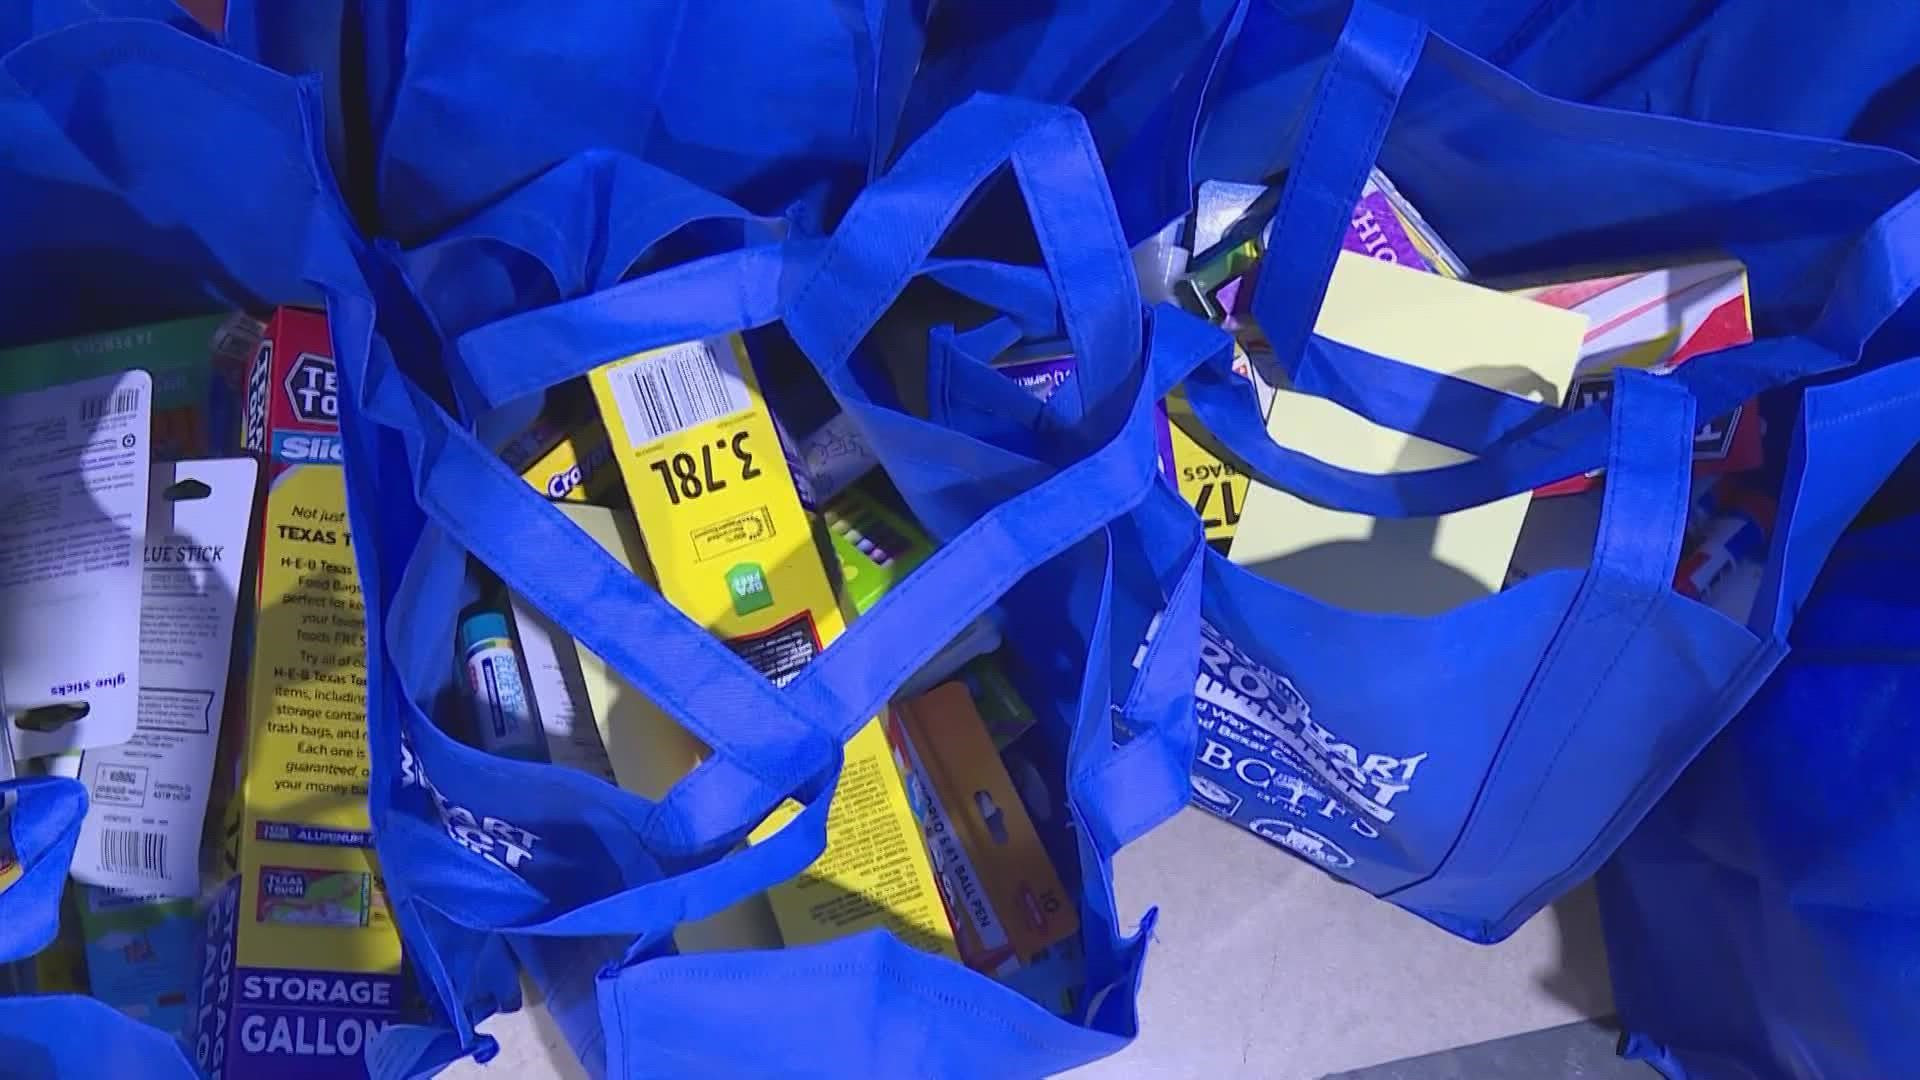 United Way of San Antonio and Bexar County organizers will distribute $80,000 worth of school supplies to Edgewood and Southwest ISD teachers Monday morning.